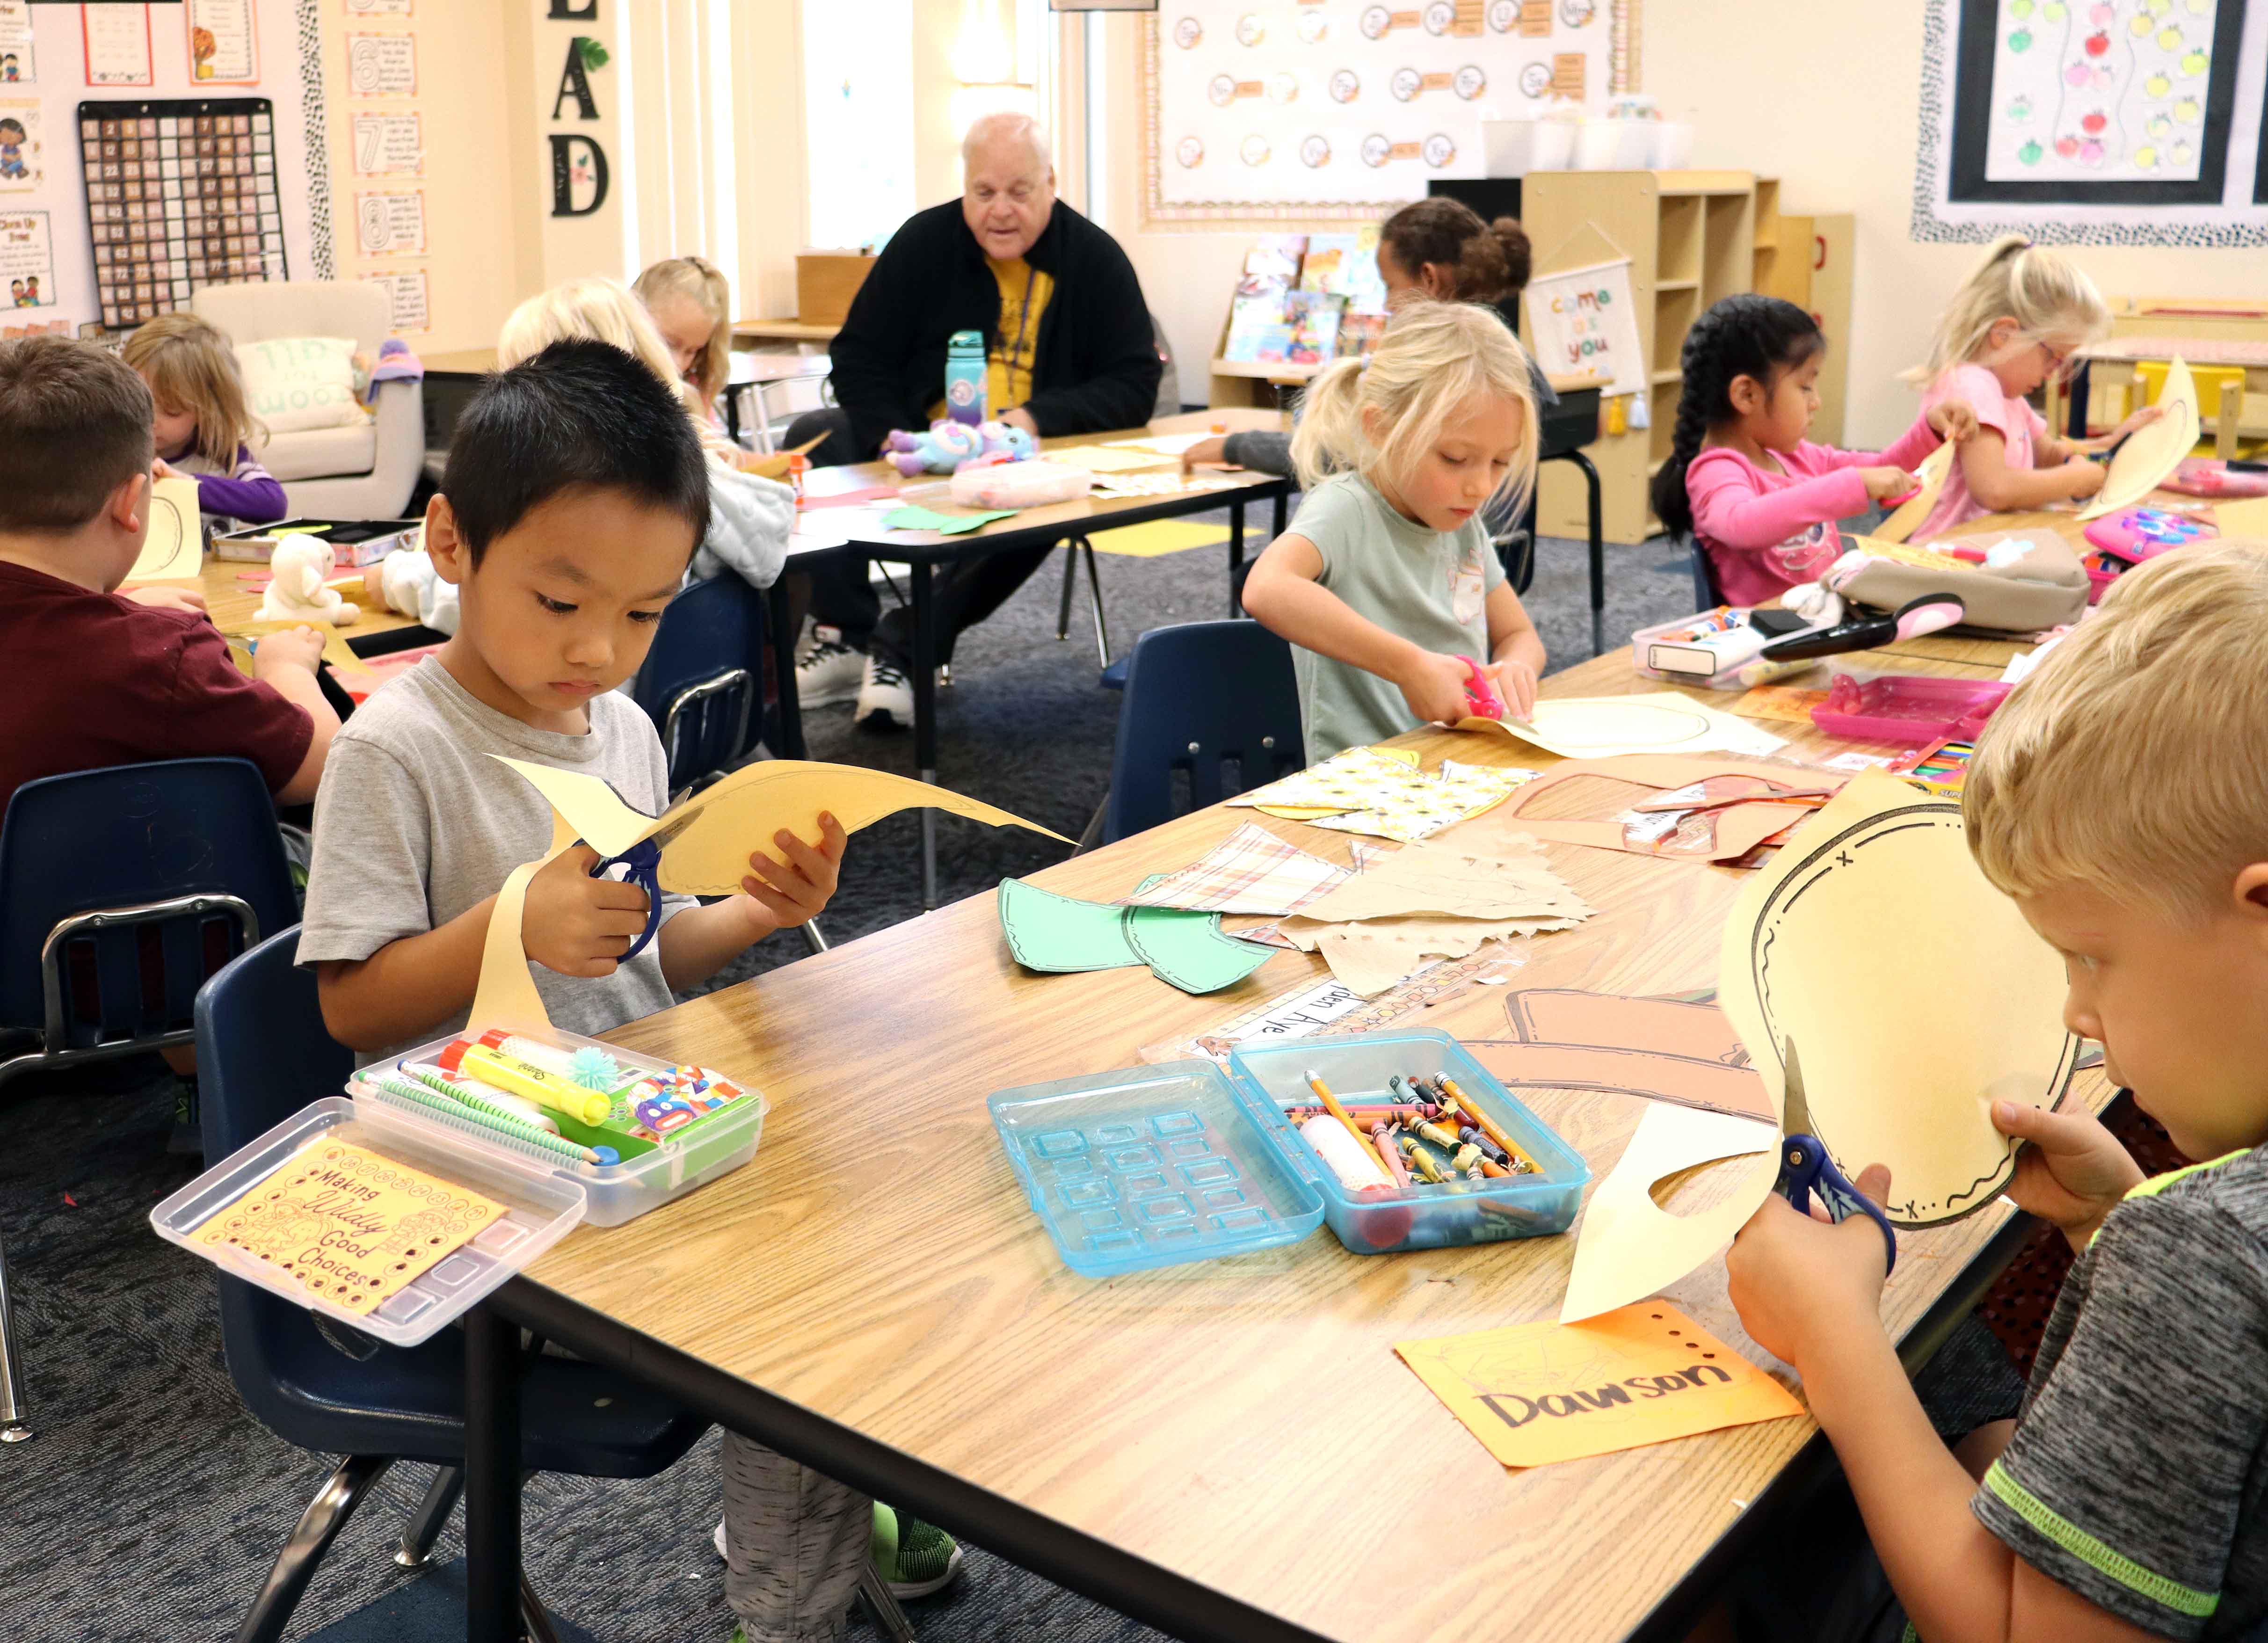 Elementary students cut paper during an art project